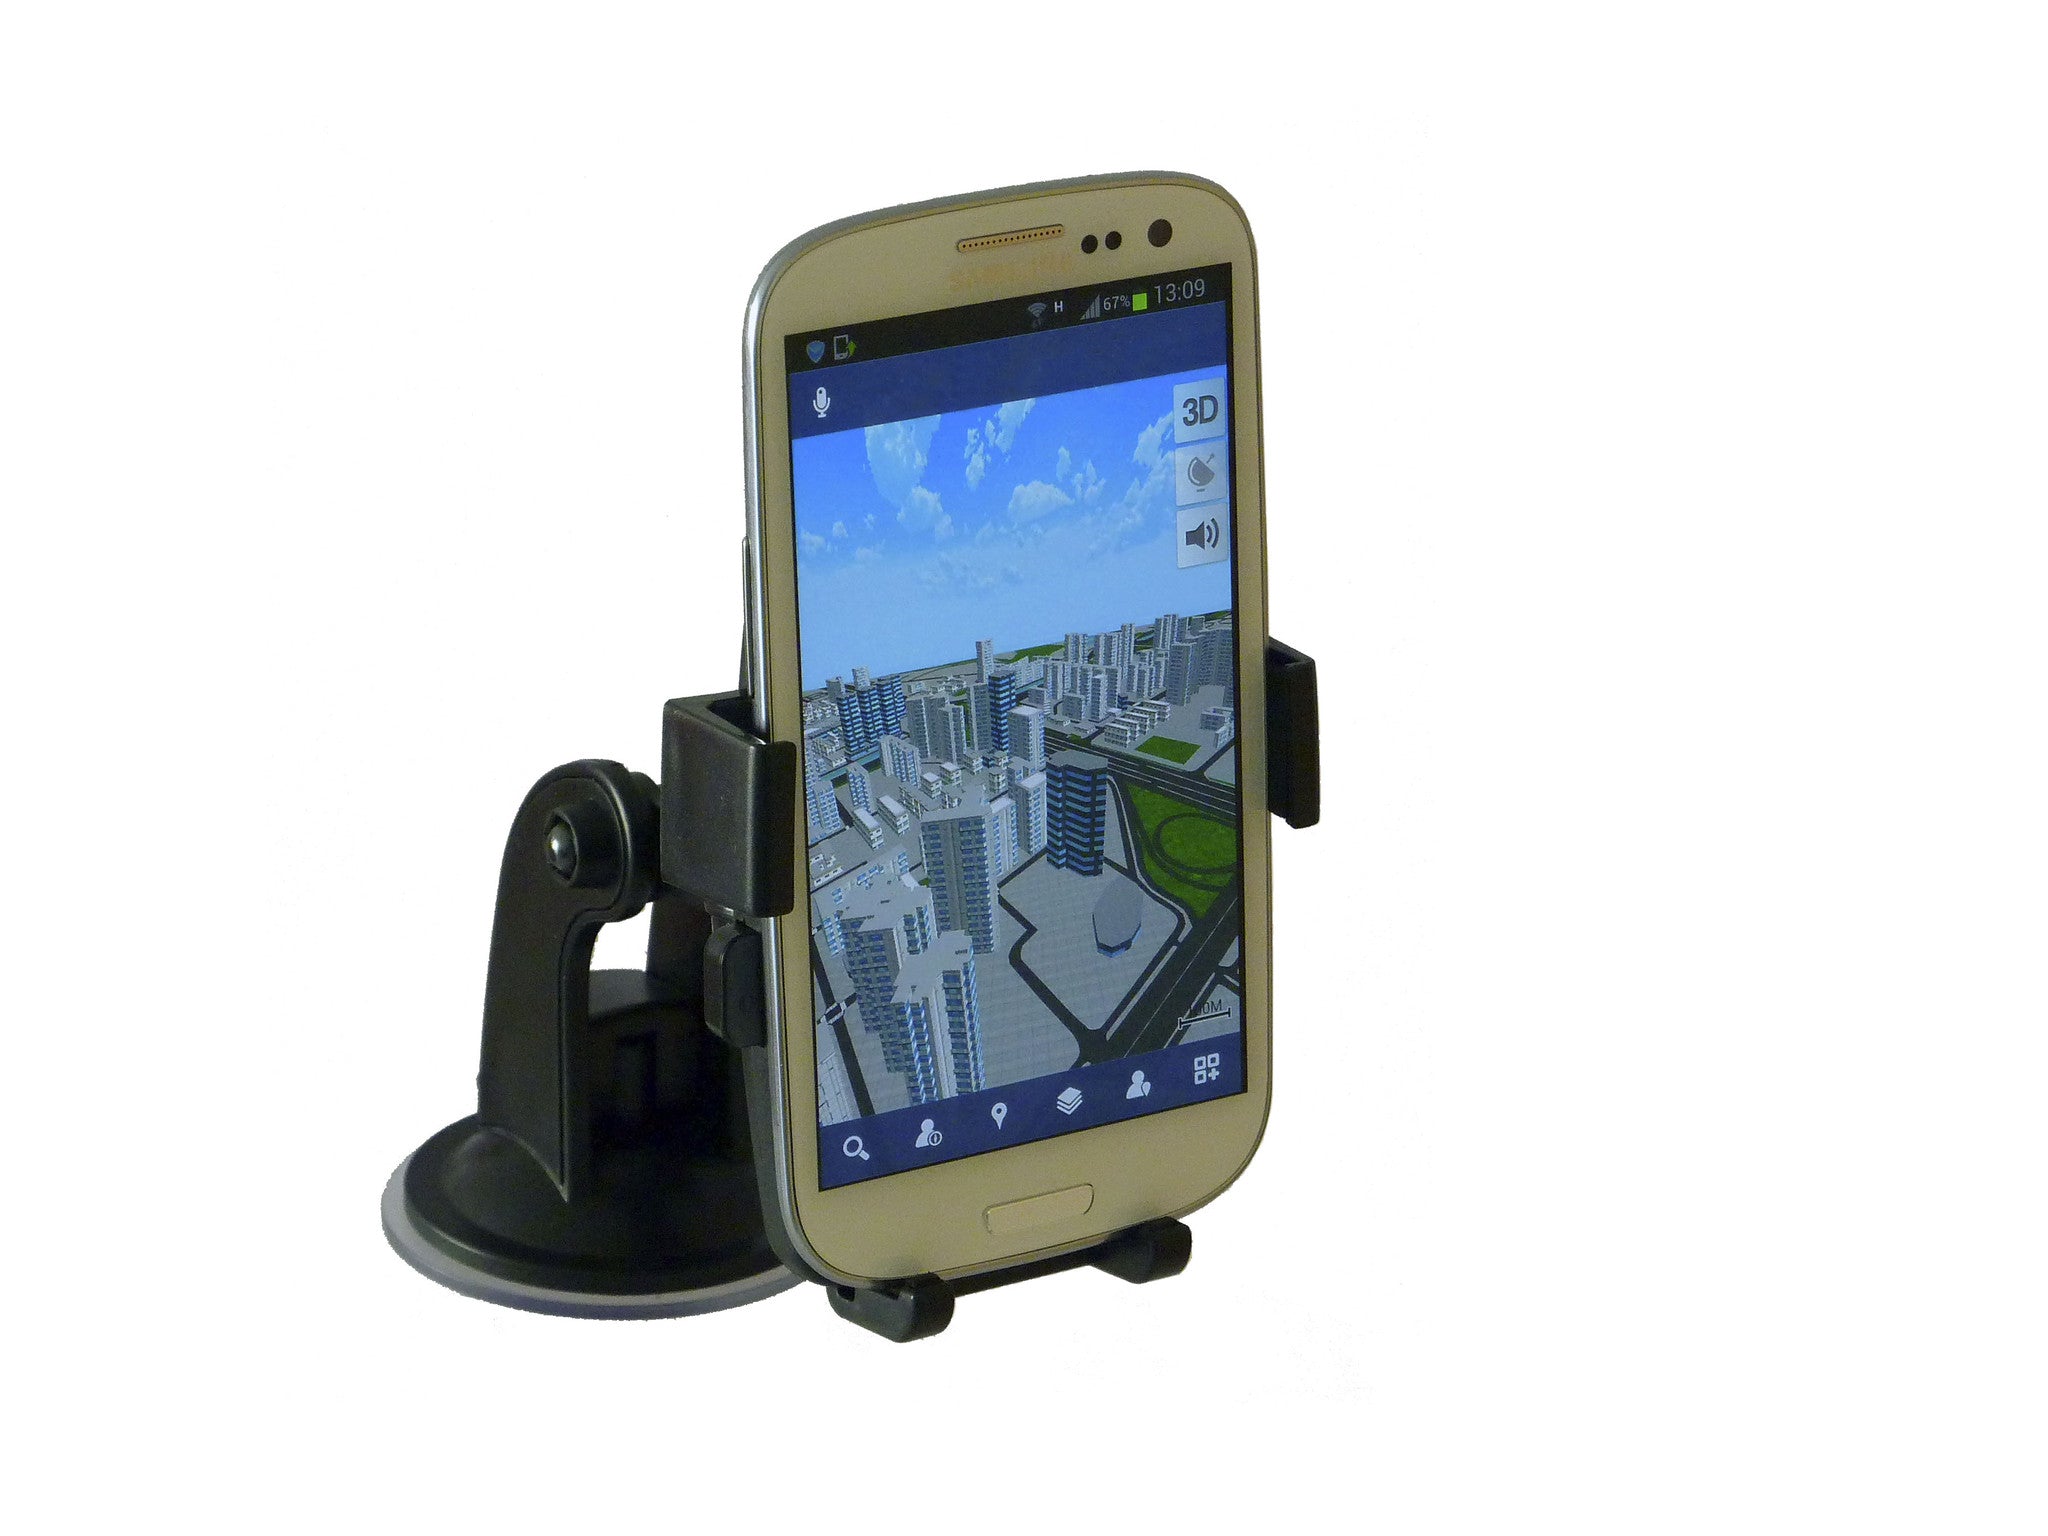 "Dock N Launch" NFC Car Mount with SparkMarks NFC